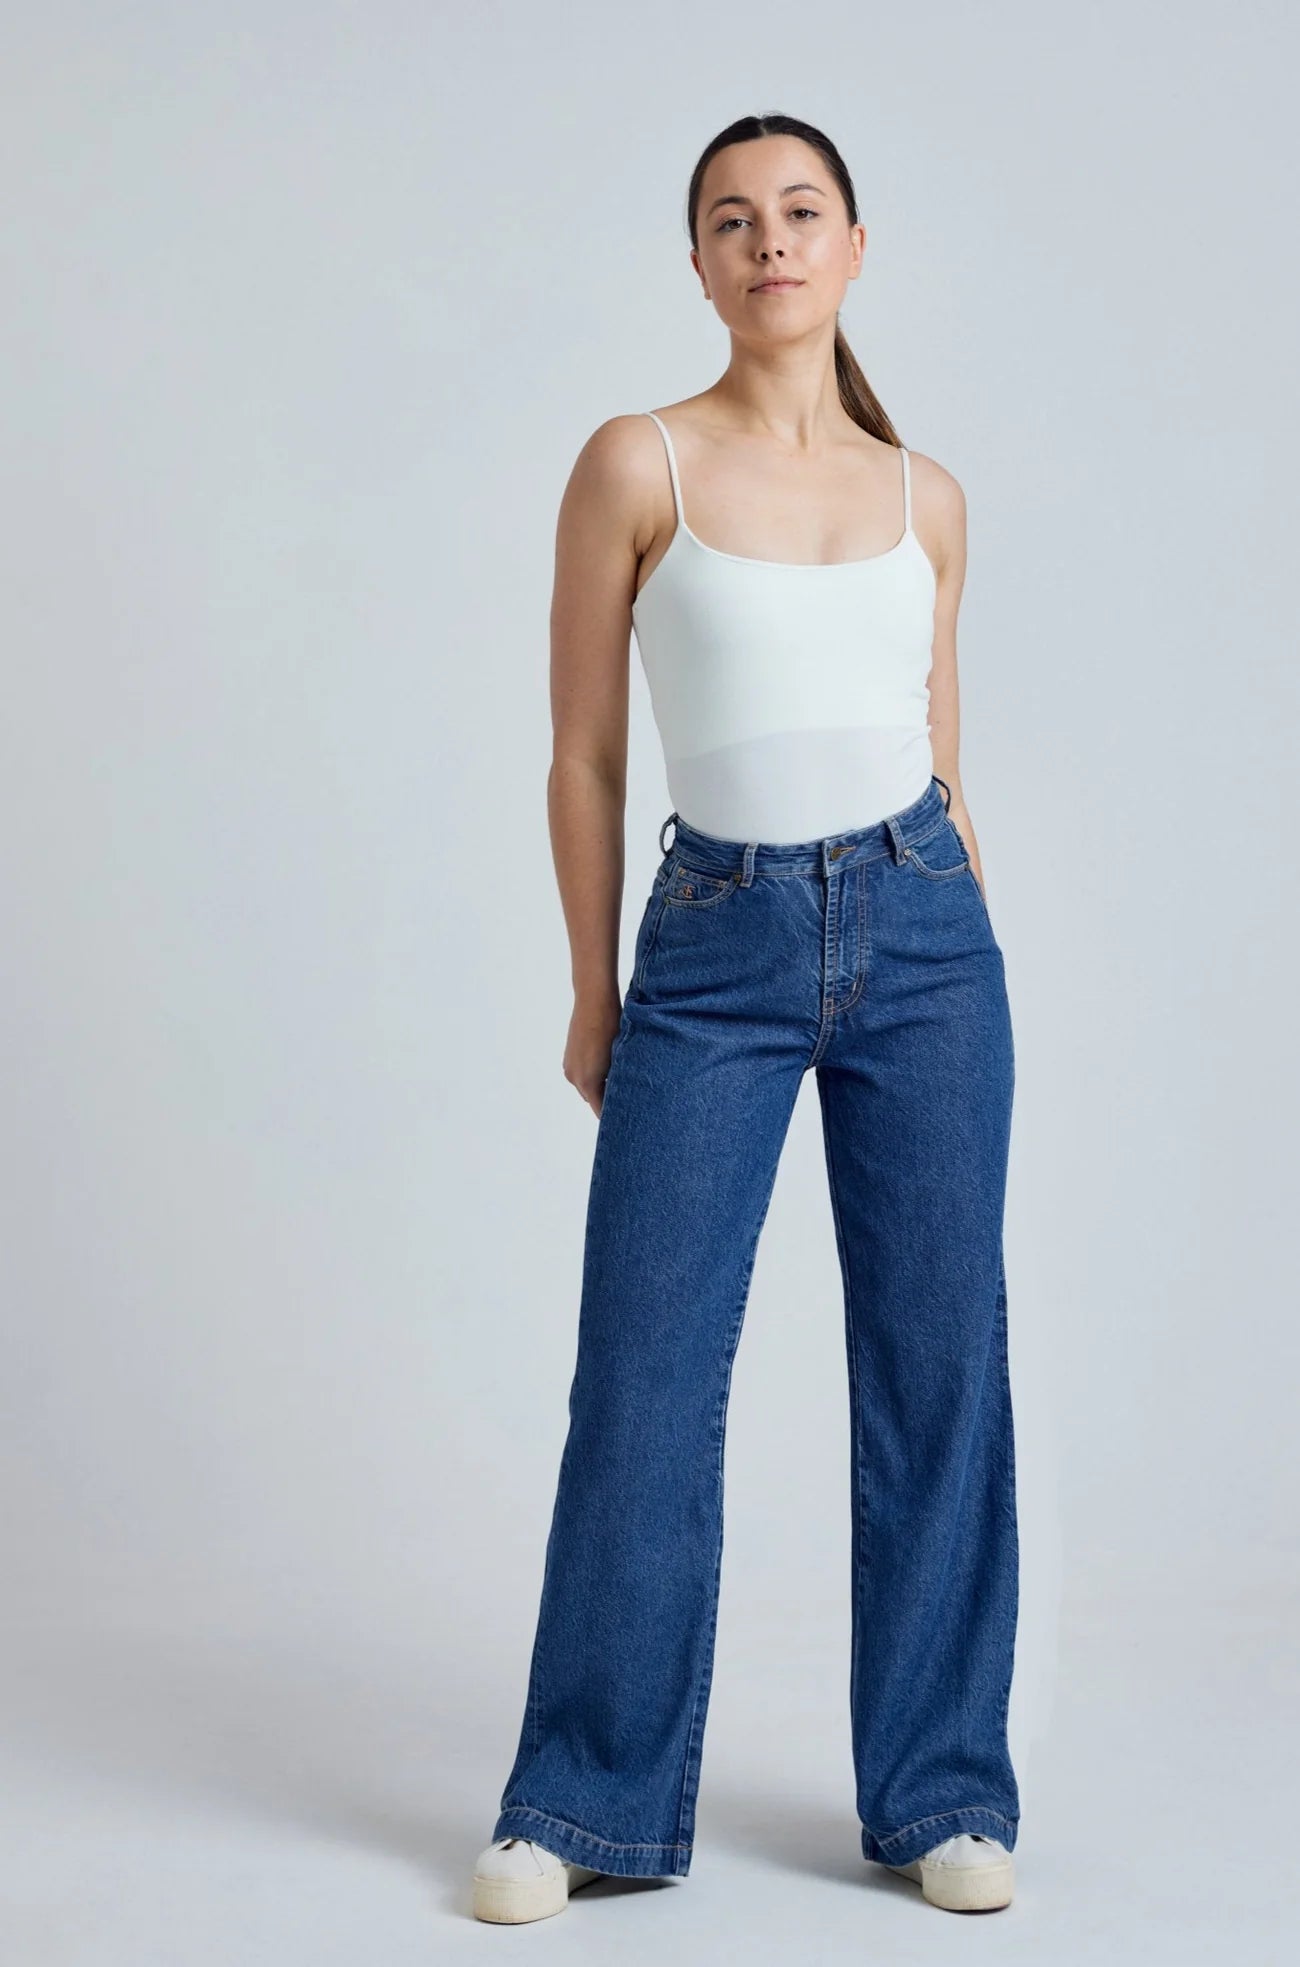 Beech Etta High Waist Wide Leg Jeans Pre Consumer Recycled Lyocell, Lyocell, Recycled Cotton and Acetate Long